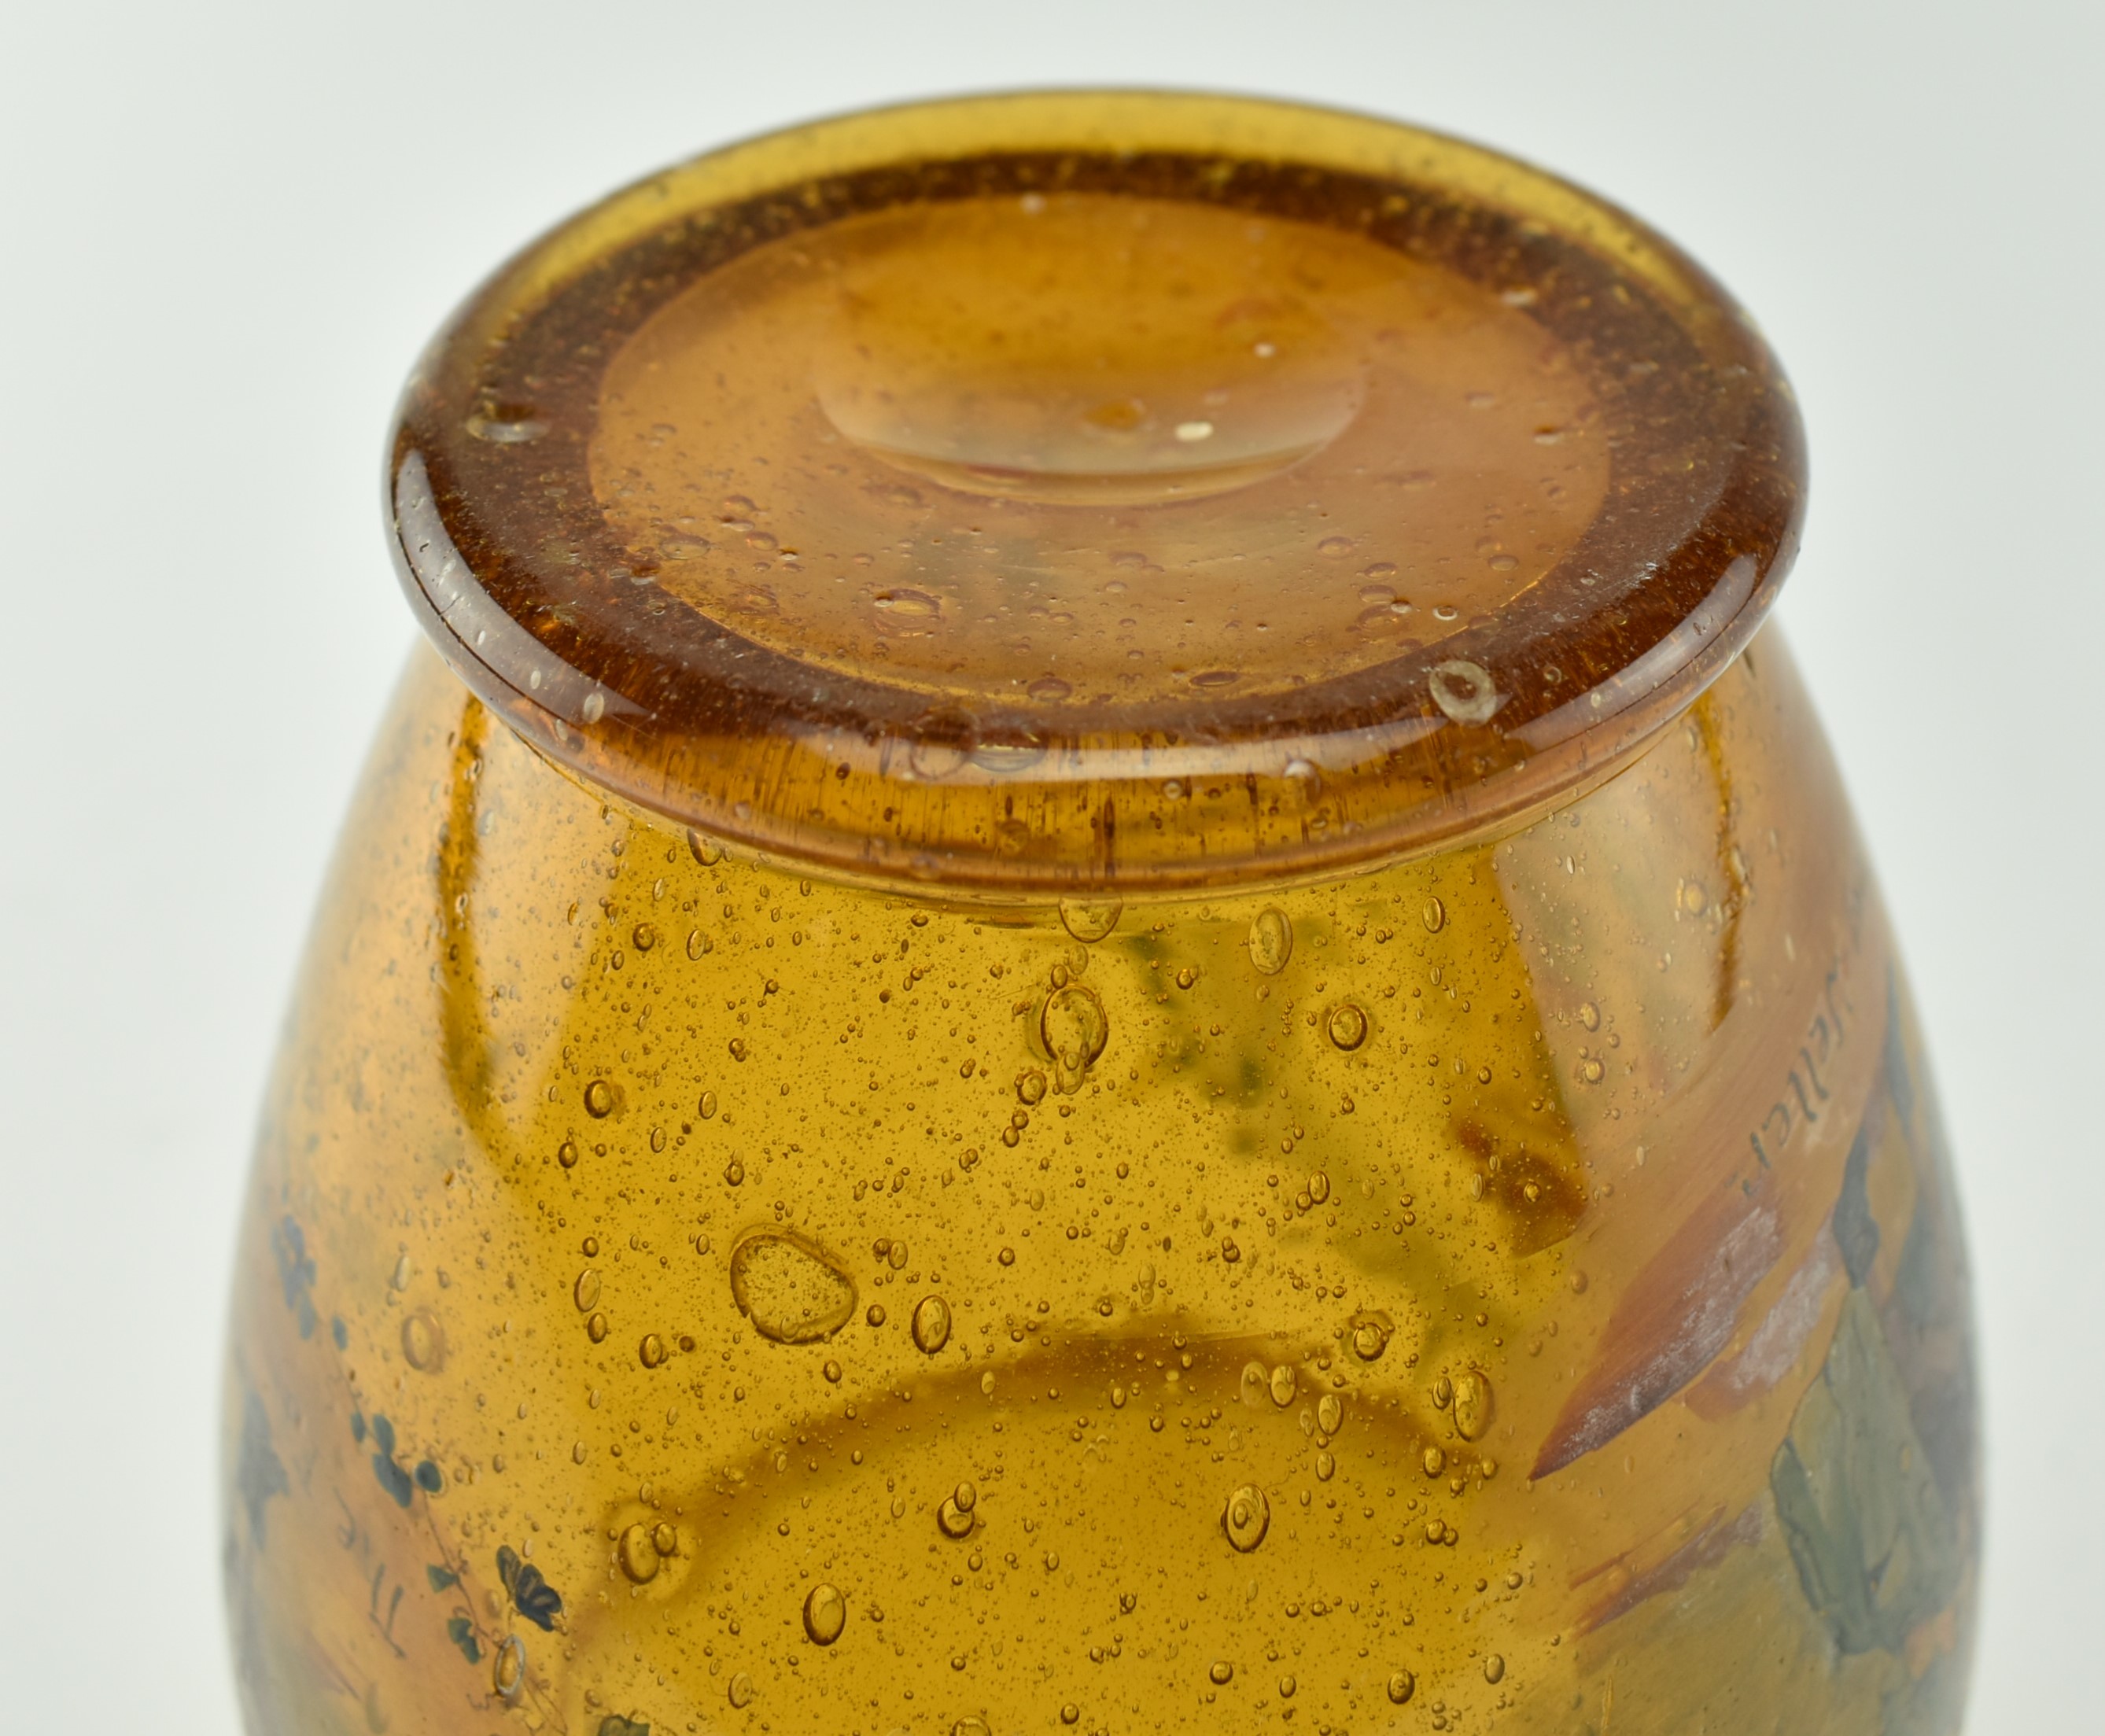 LATE 19TH CENTURY AMBER GLASS VASE WITH DICKENS SCENES - Image 5 of 5